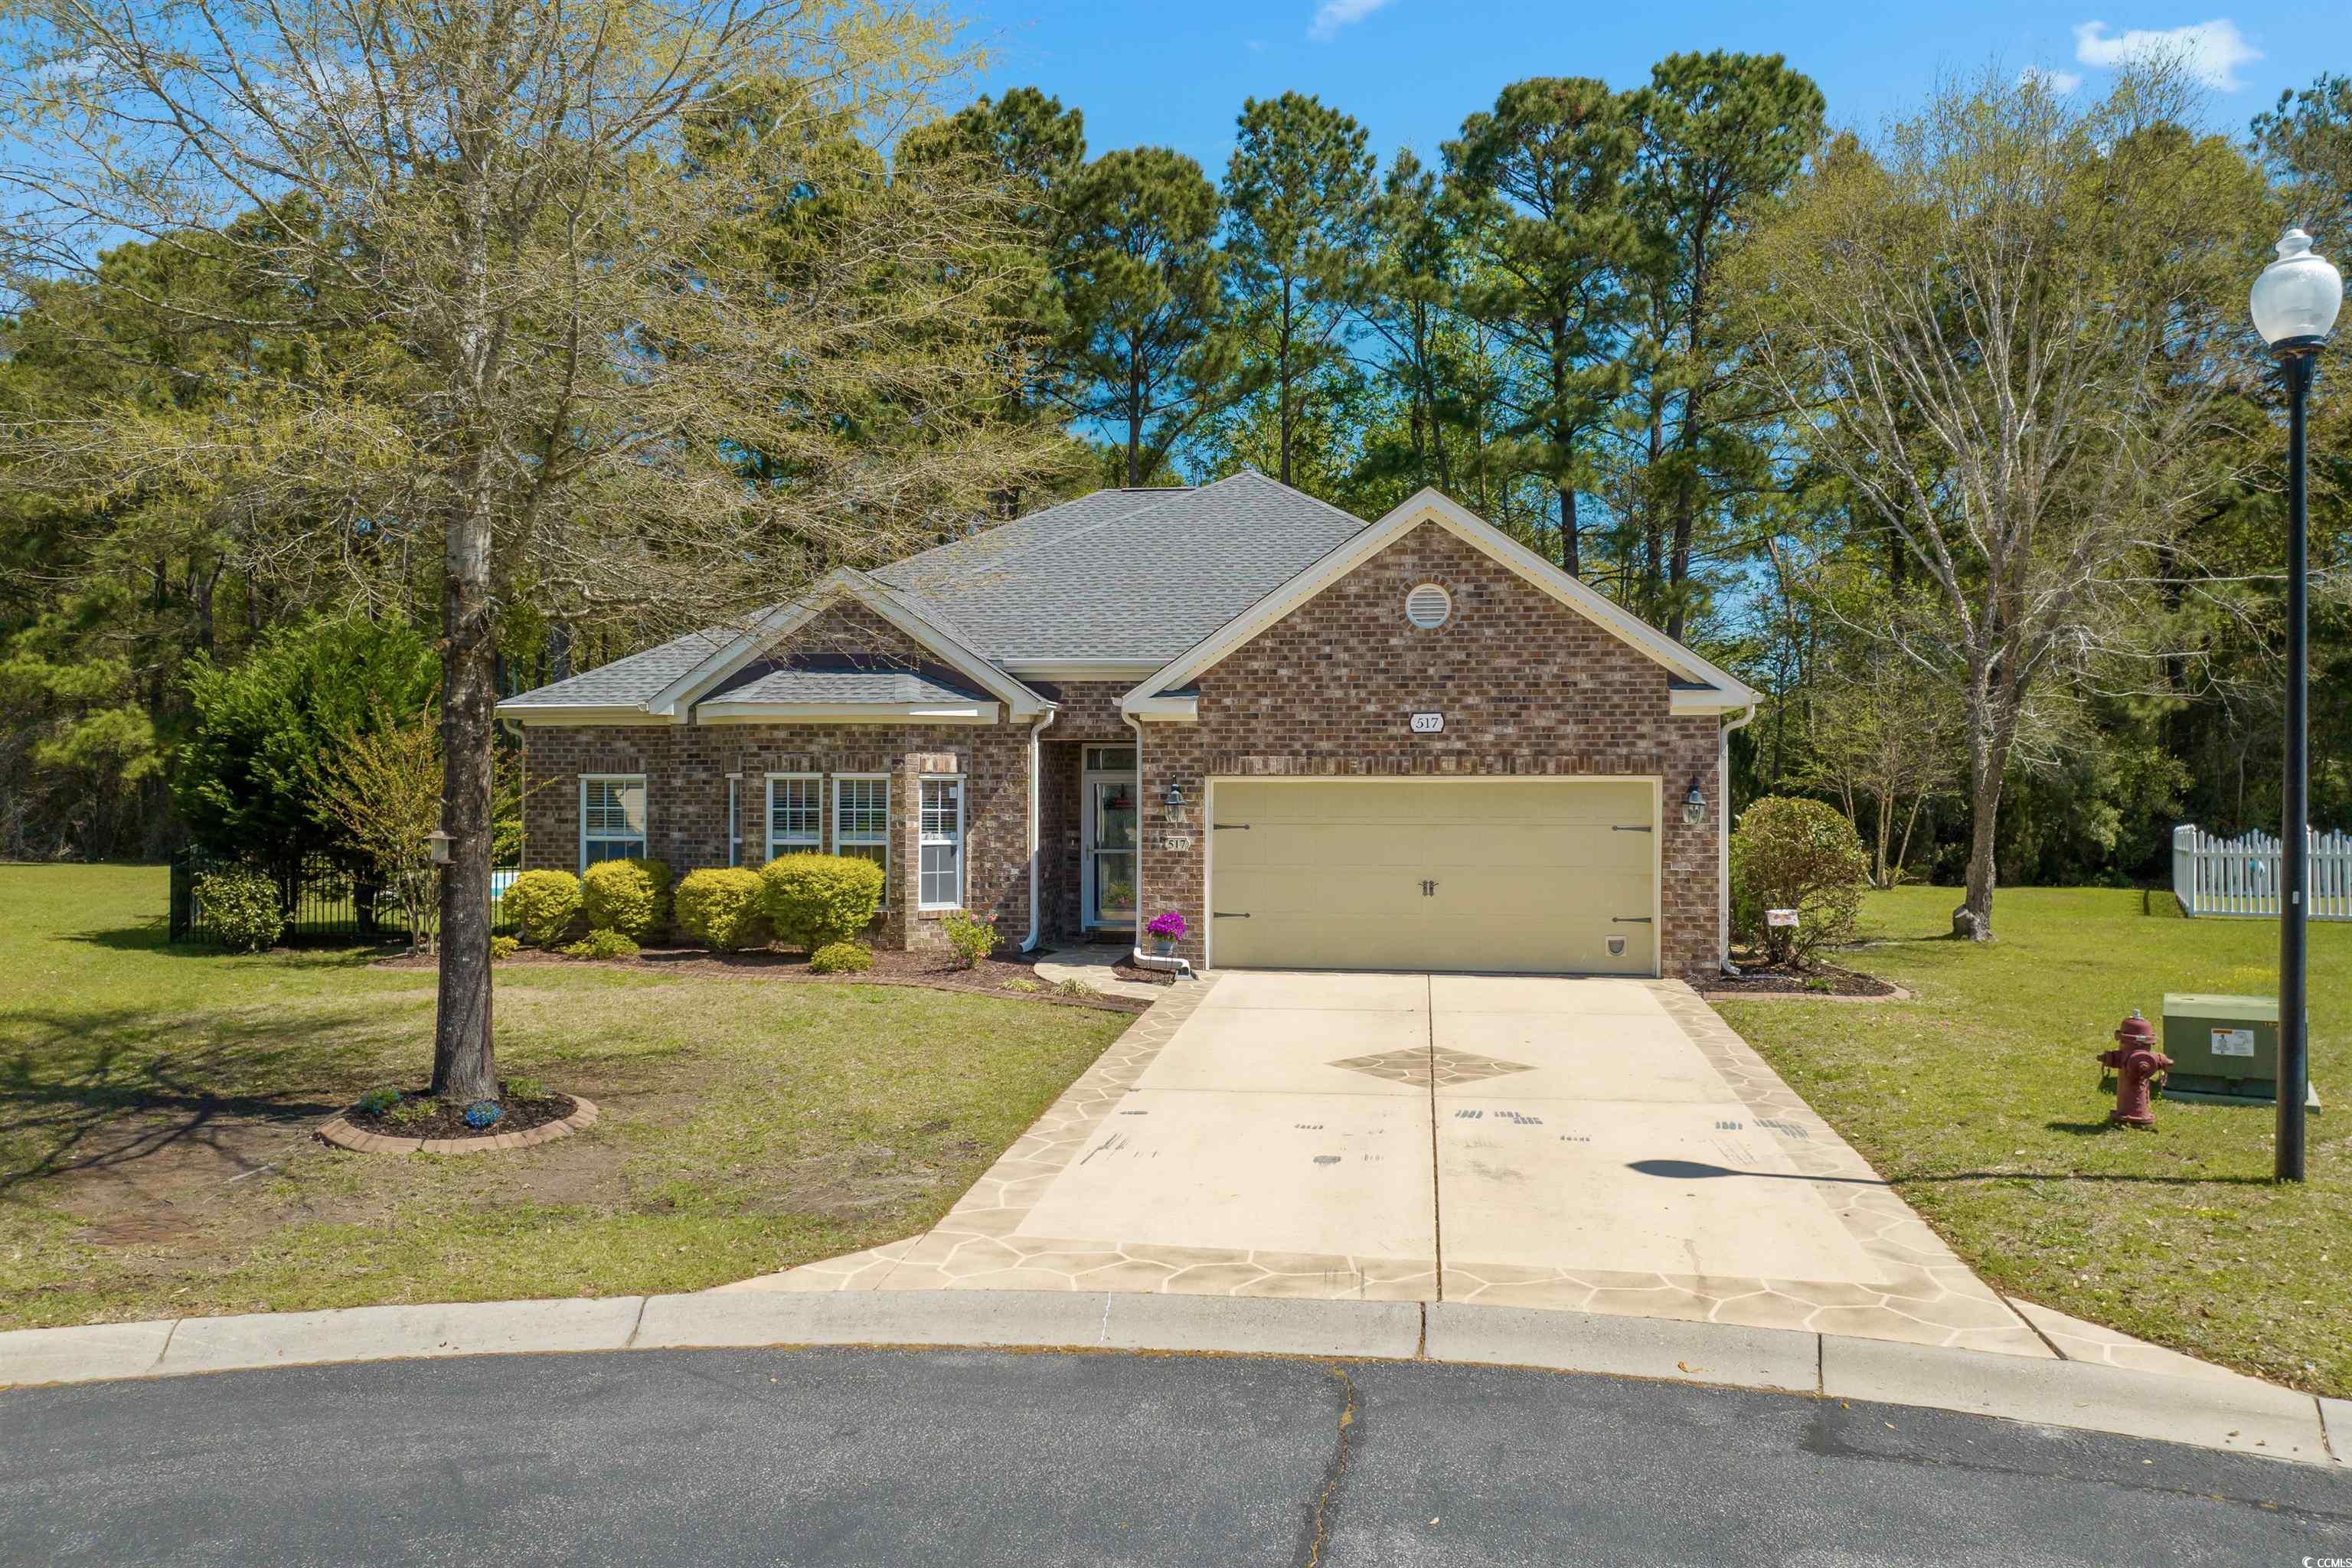 517 Macallan Ct., Conway, SC 29526